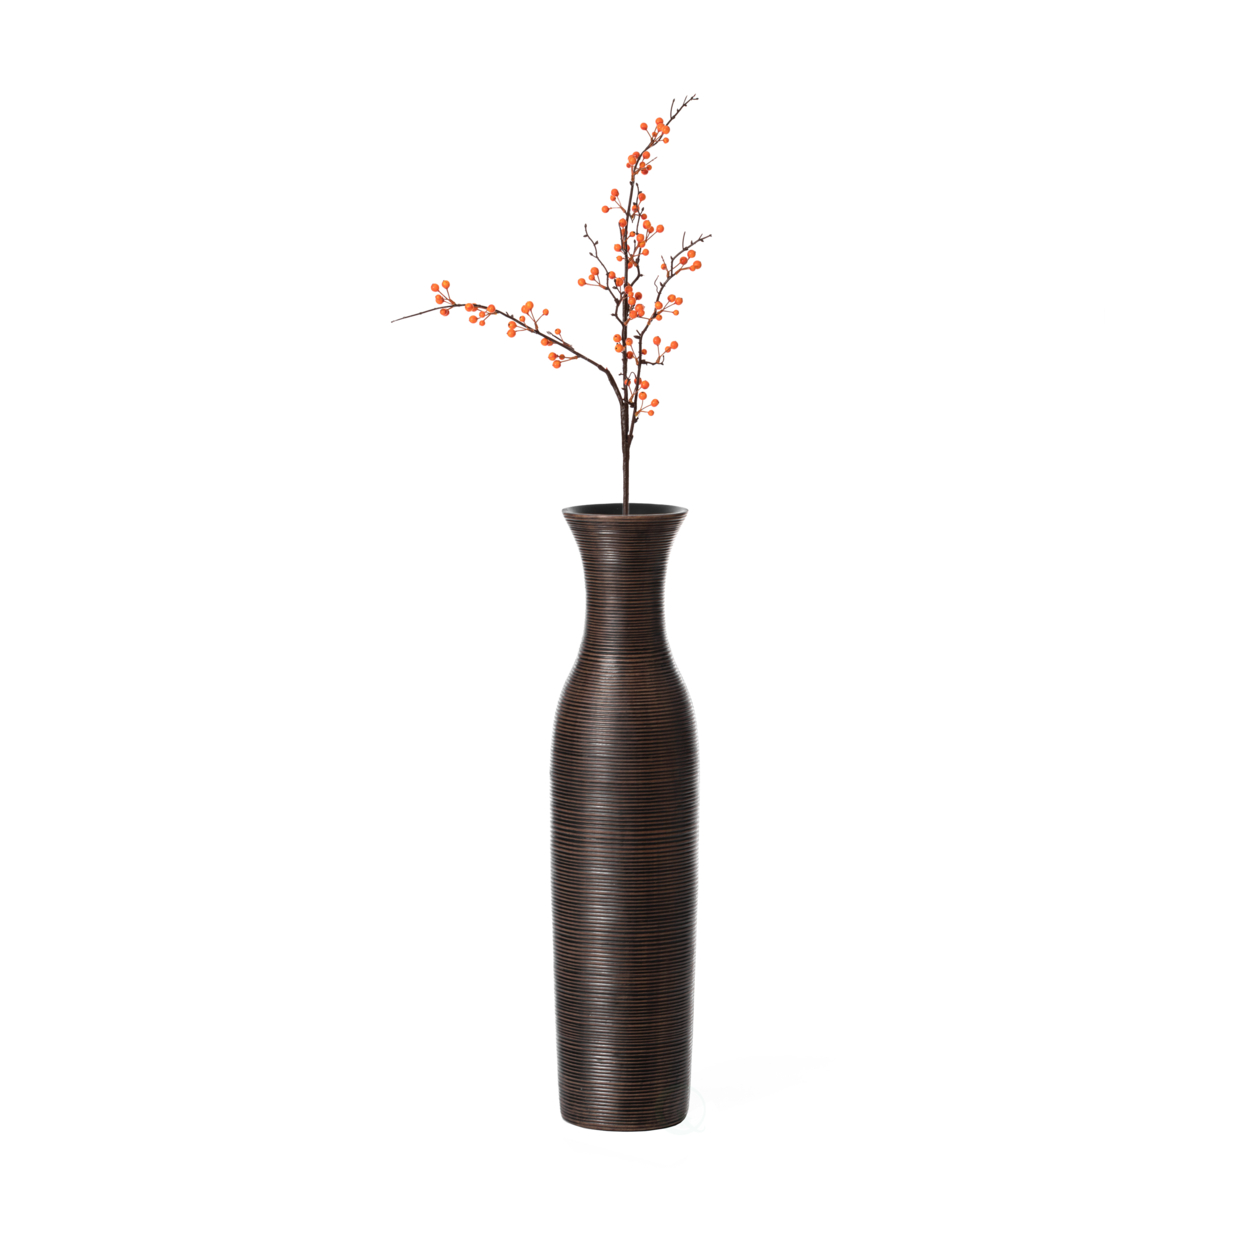 Tall Decorative Modern Ripped Trumpet Design Floor Vase, Brown - Small